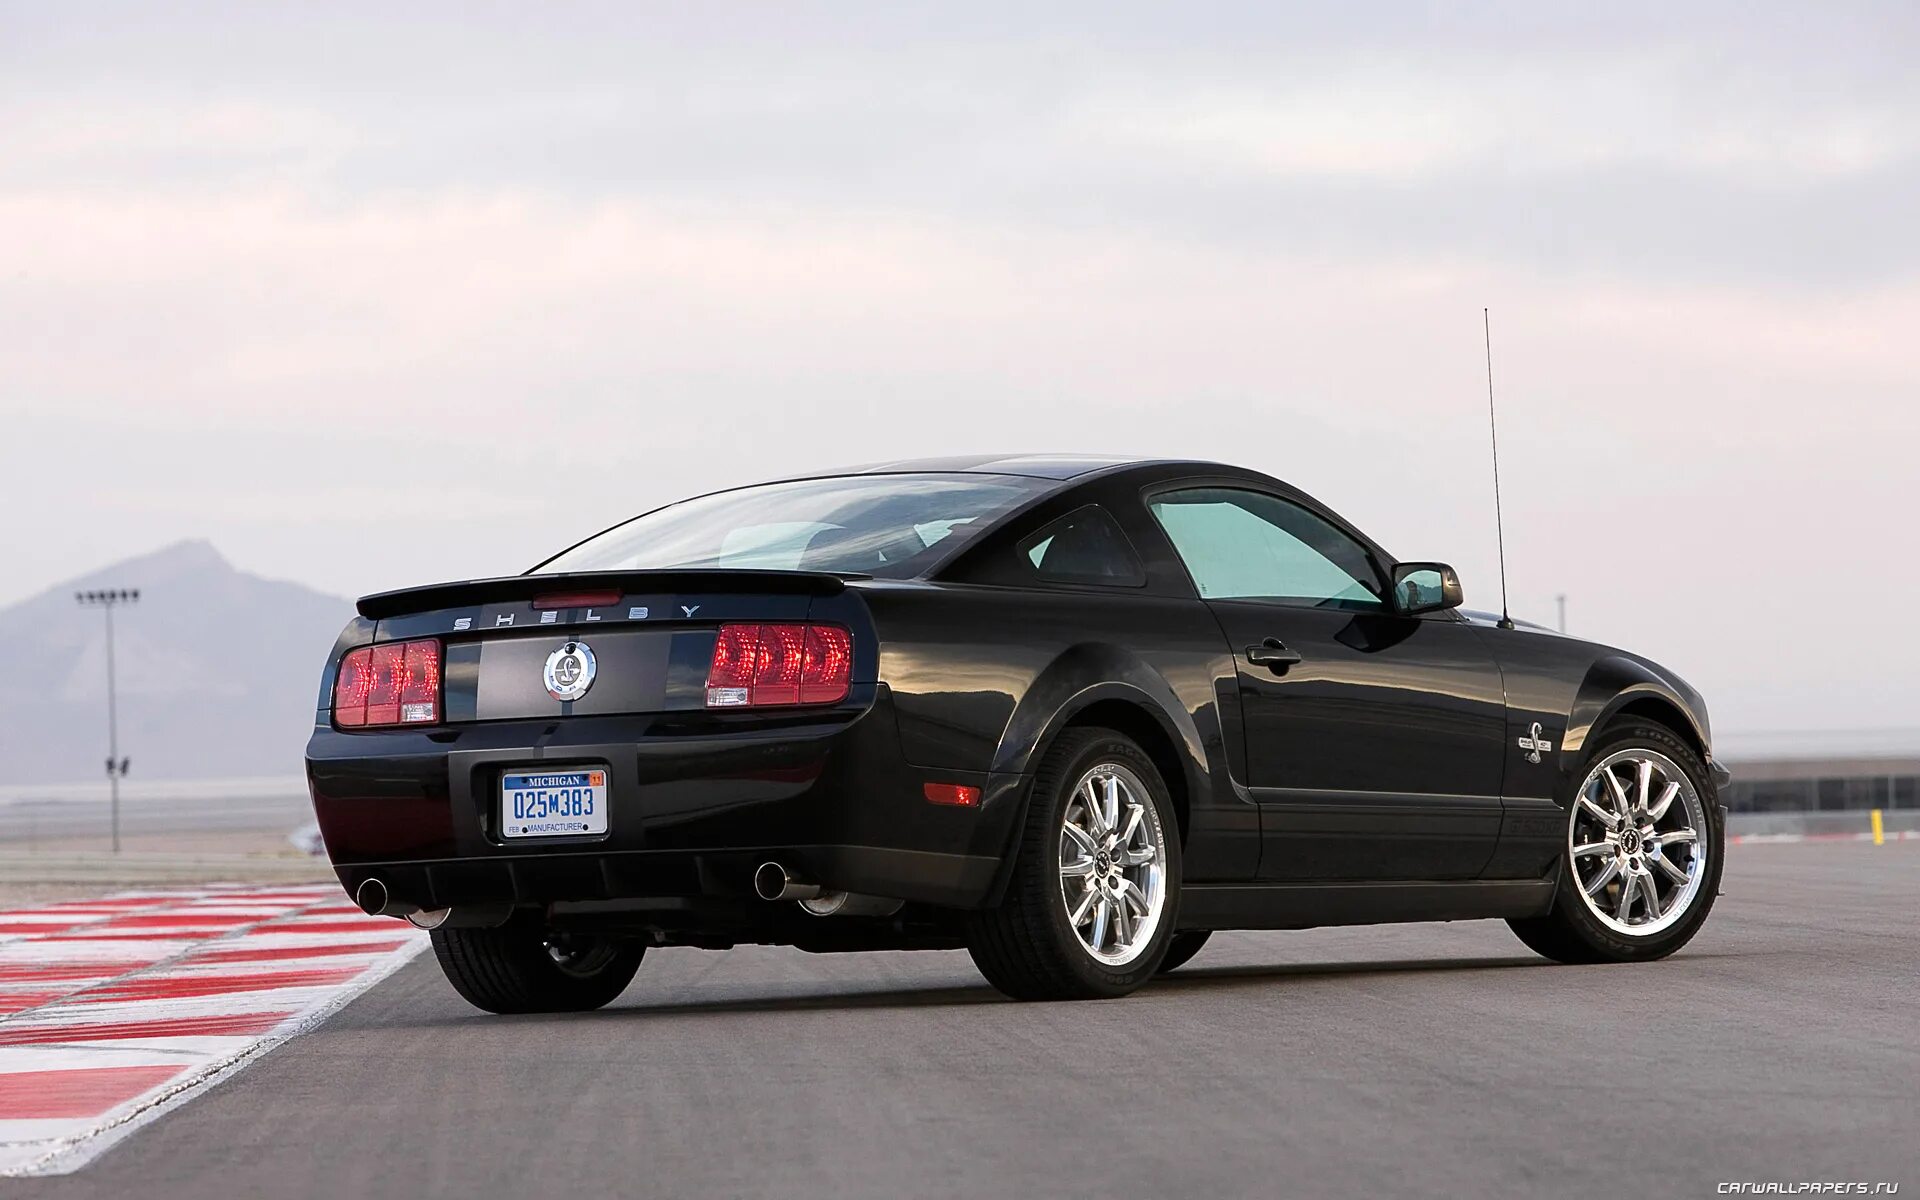 Ford Mustang gt500kr. Форд Мустанг 2008. Ford Mustang Shelby gt500kr 2008. Ford Shelby gt500kr 2008. Мустанг 2008